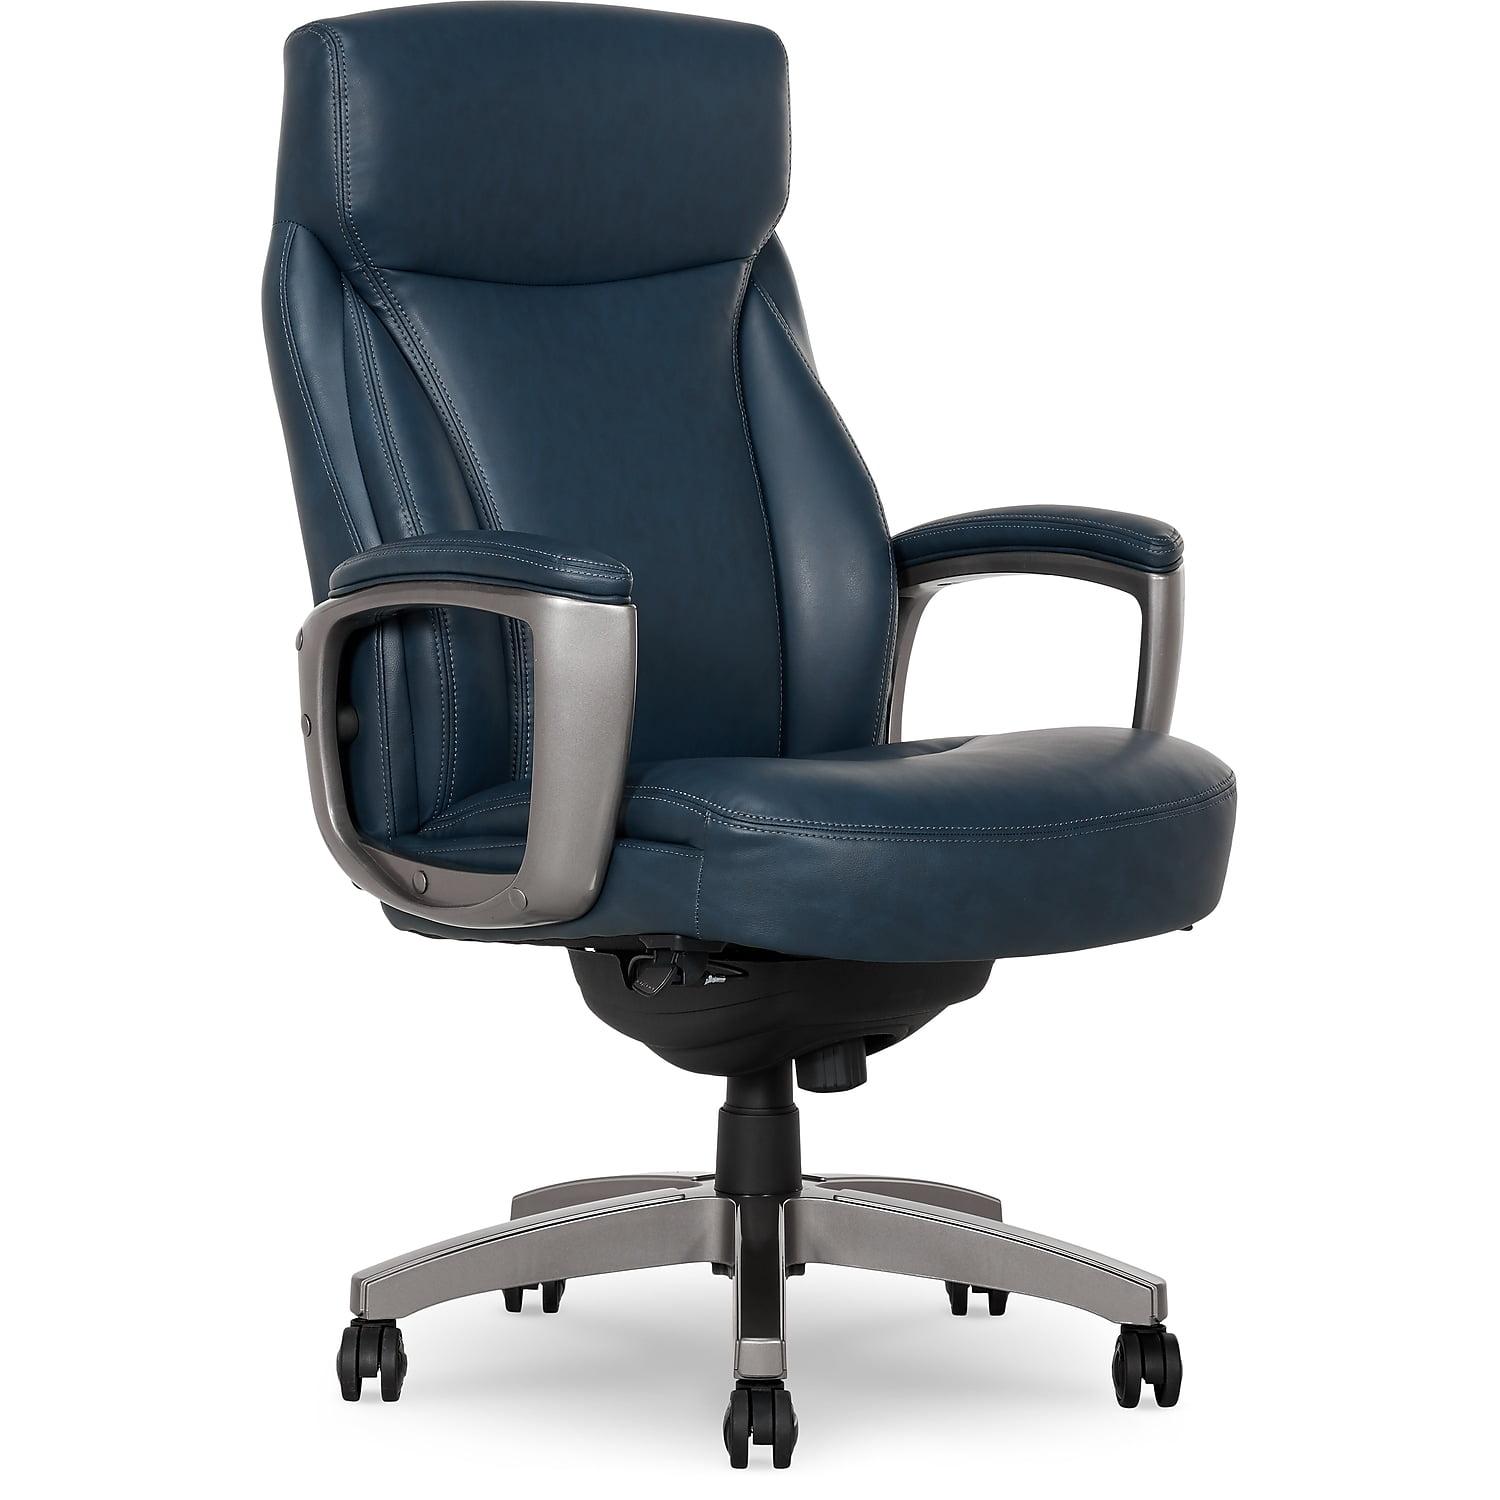 Executive Swivel Office Chair in Soft Blue Leather with Comfort Core